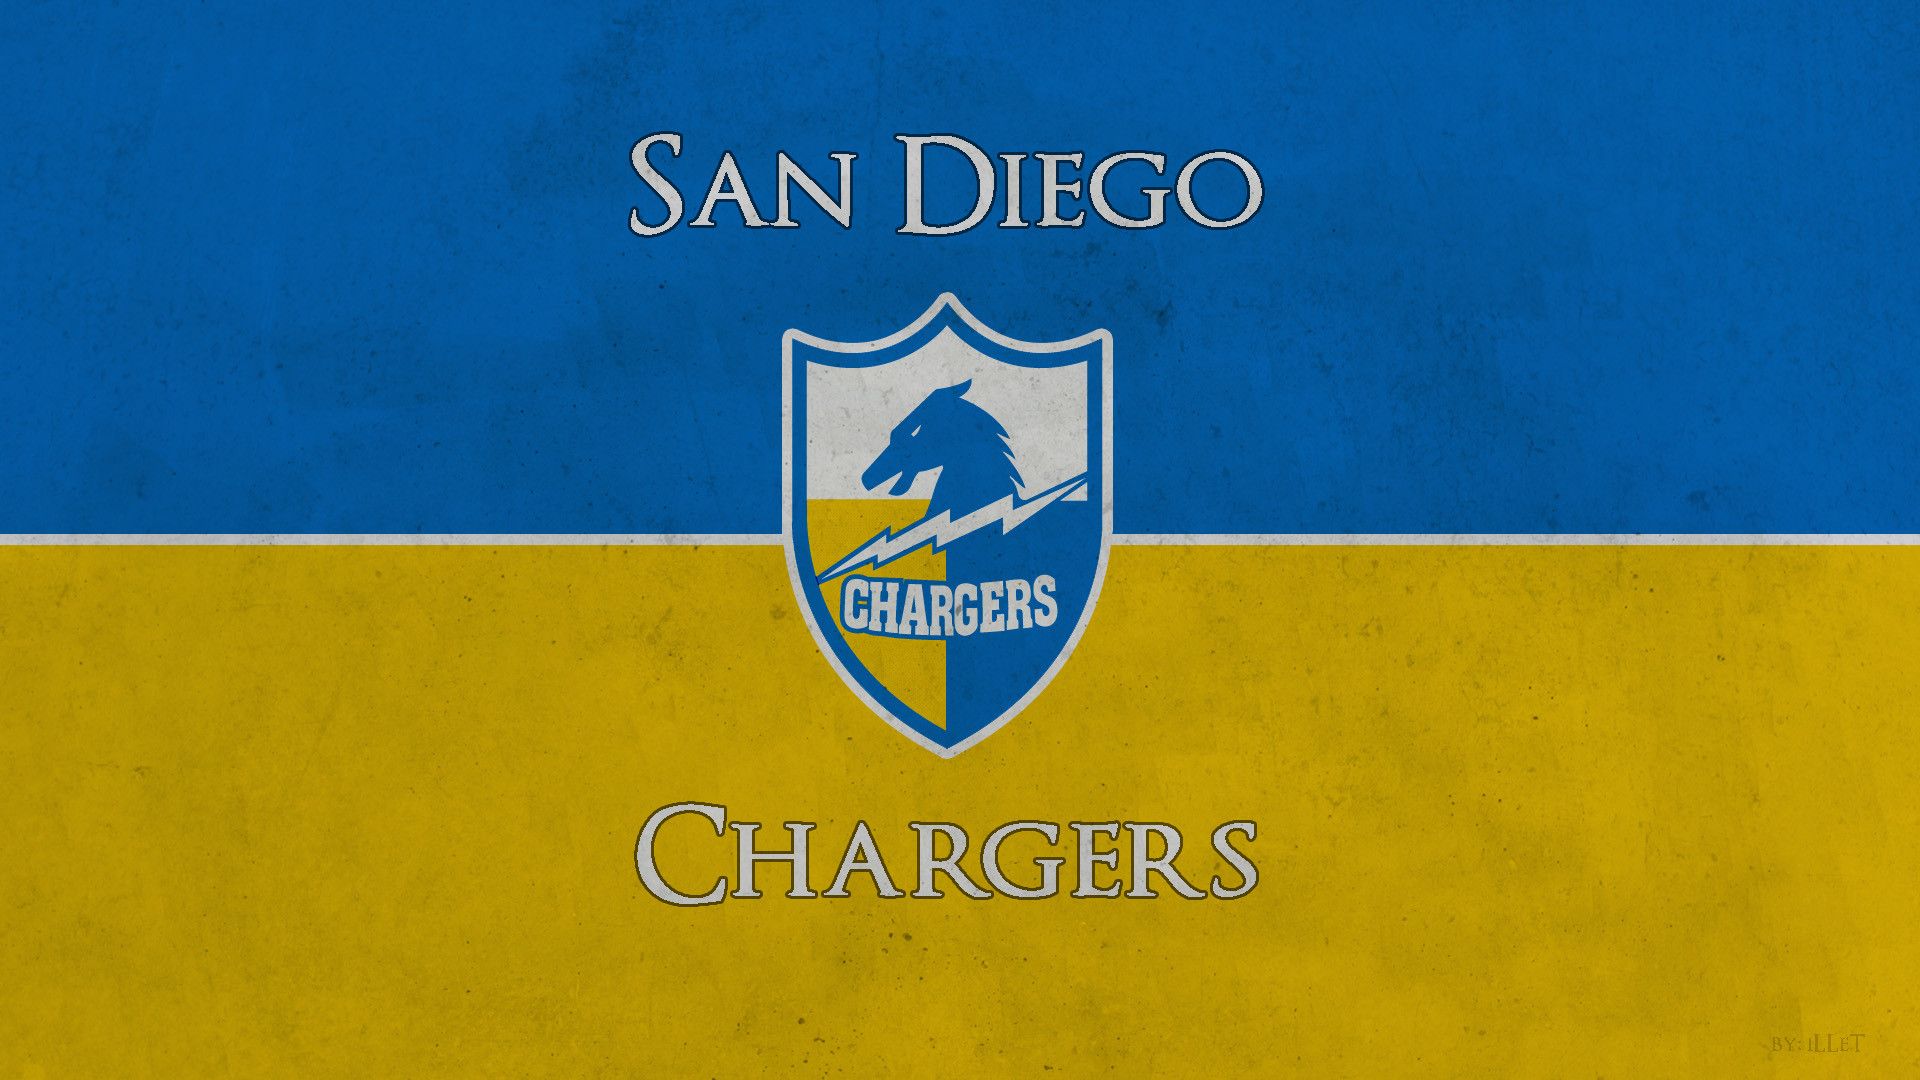 Chargers 2013 Wallpaper Schedule [1920x1080] : Chargers